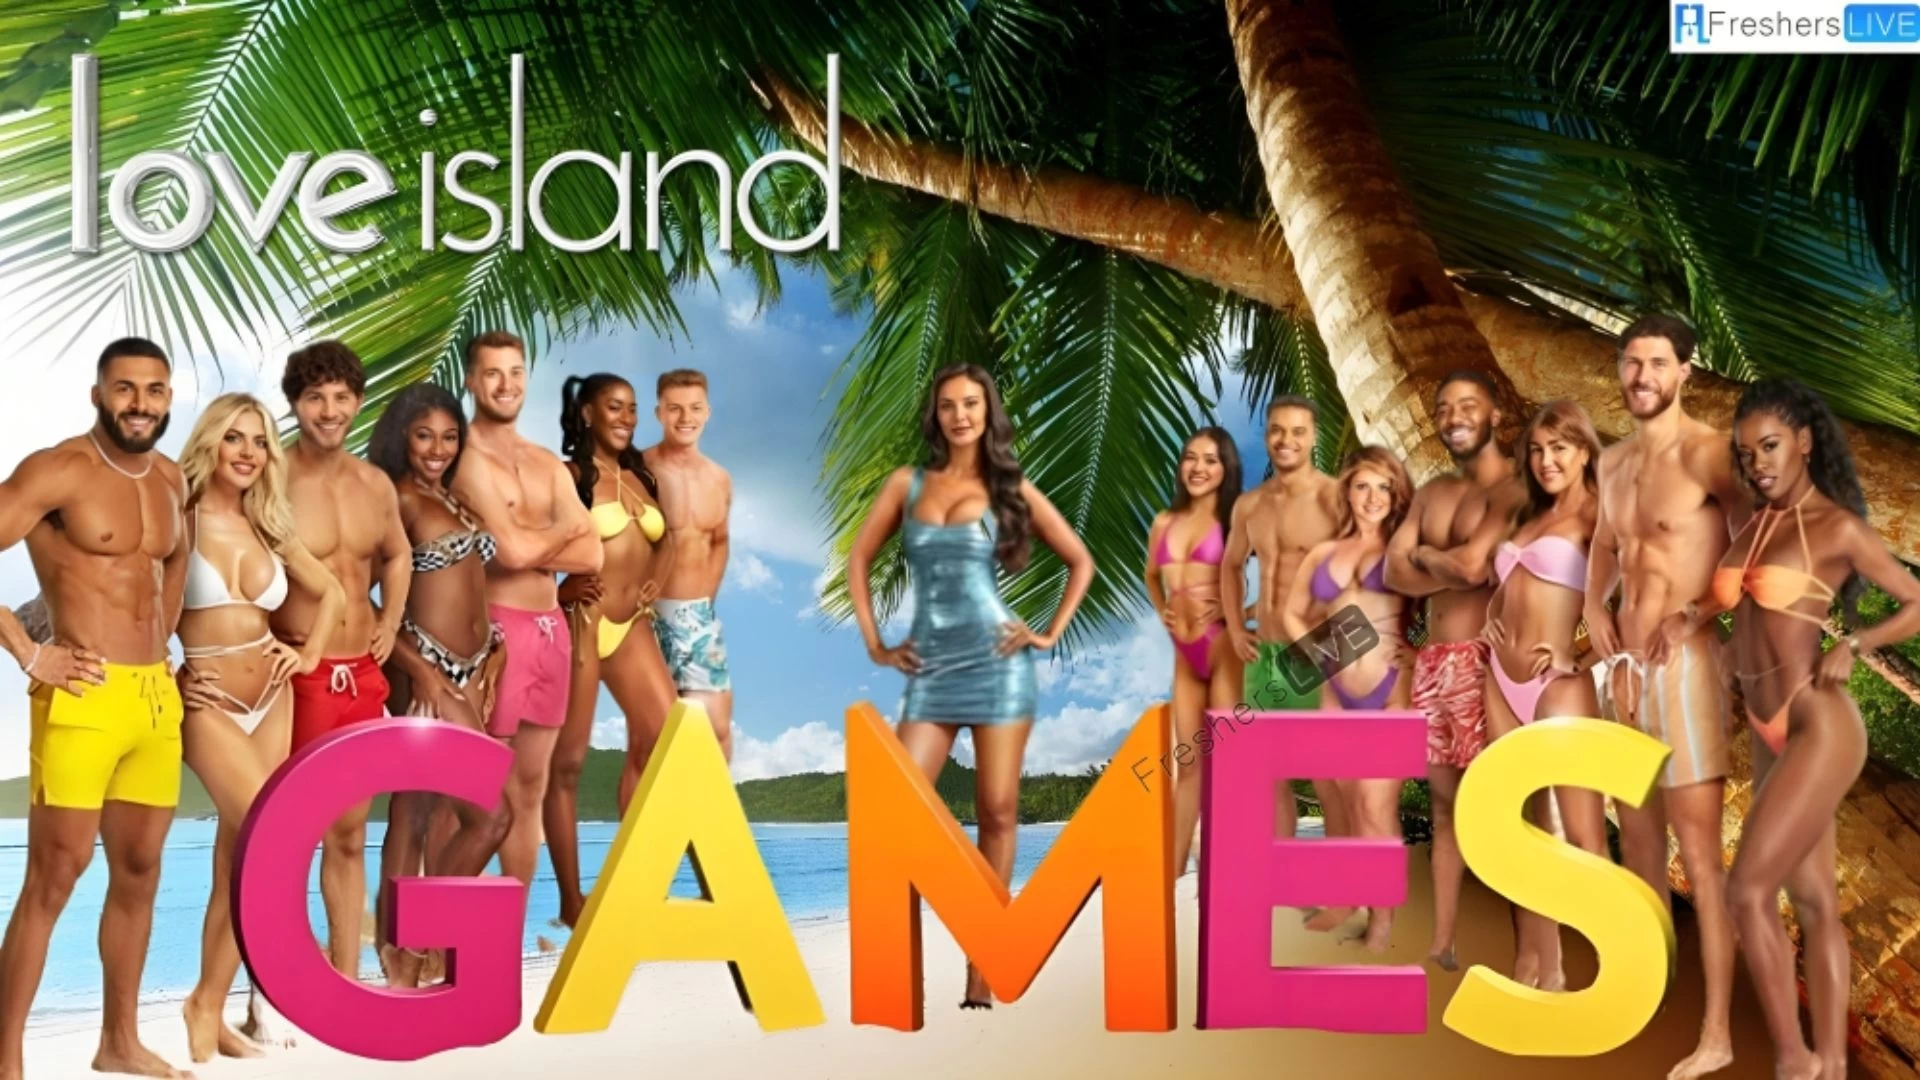 When Does Love Island Games Start? Where to Watch Love Island Game UK? Love Island Games Full Cast List